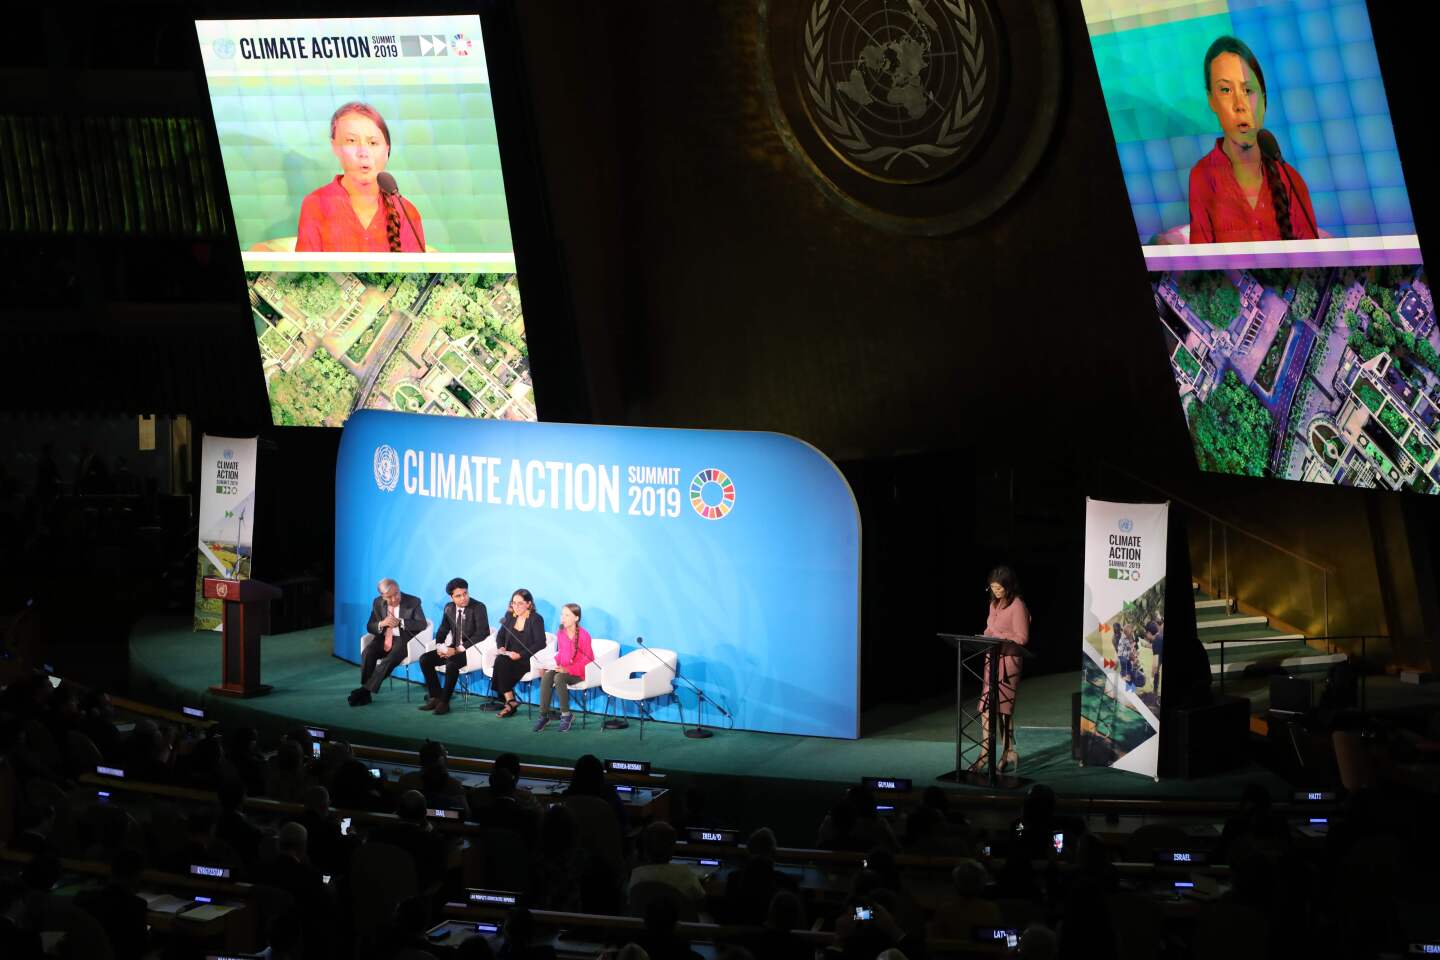 Youth Climate activist Greta Thunberg (R) speaks during the UN Climate Action Summit on September 23, 2019 at the United Nations Headquarters in New York City. (Photo by Ludovic MARIN / AFP)LUDOVIC MARIN/AFP/Getty Images ** OUTS - ELSENT, FPG, CM - OUTS * NM, PH, VA if sourced by CT, LA or MoD **